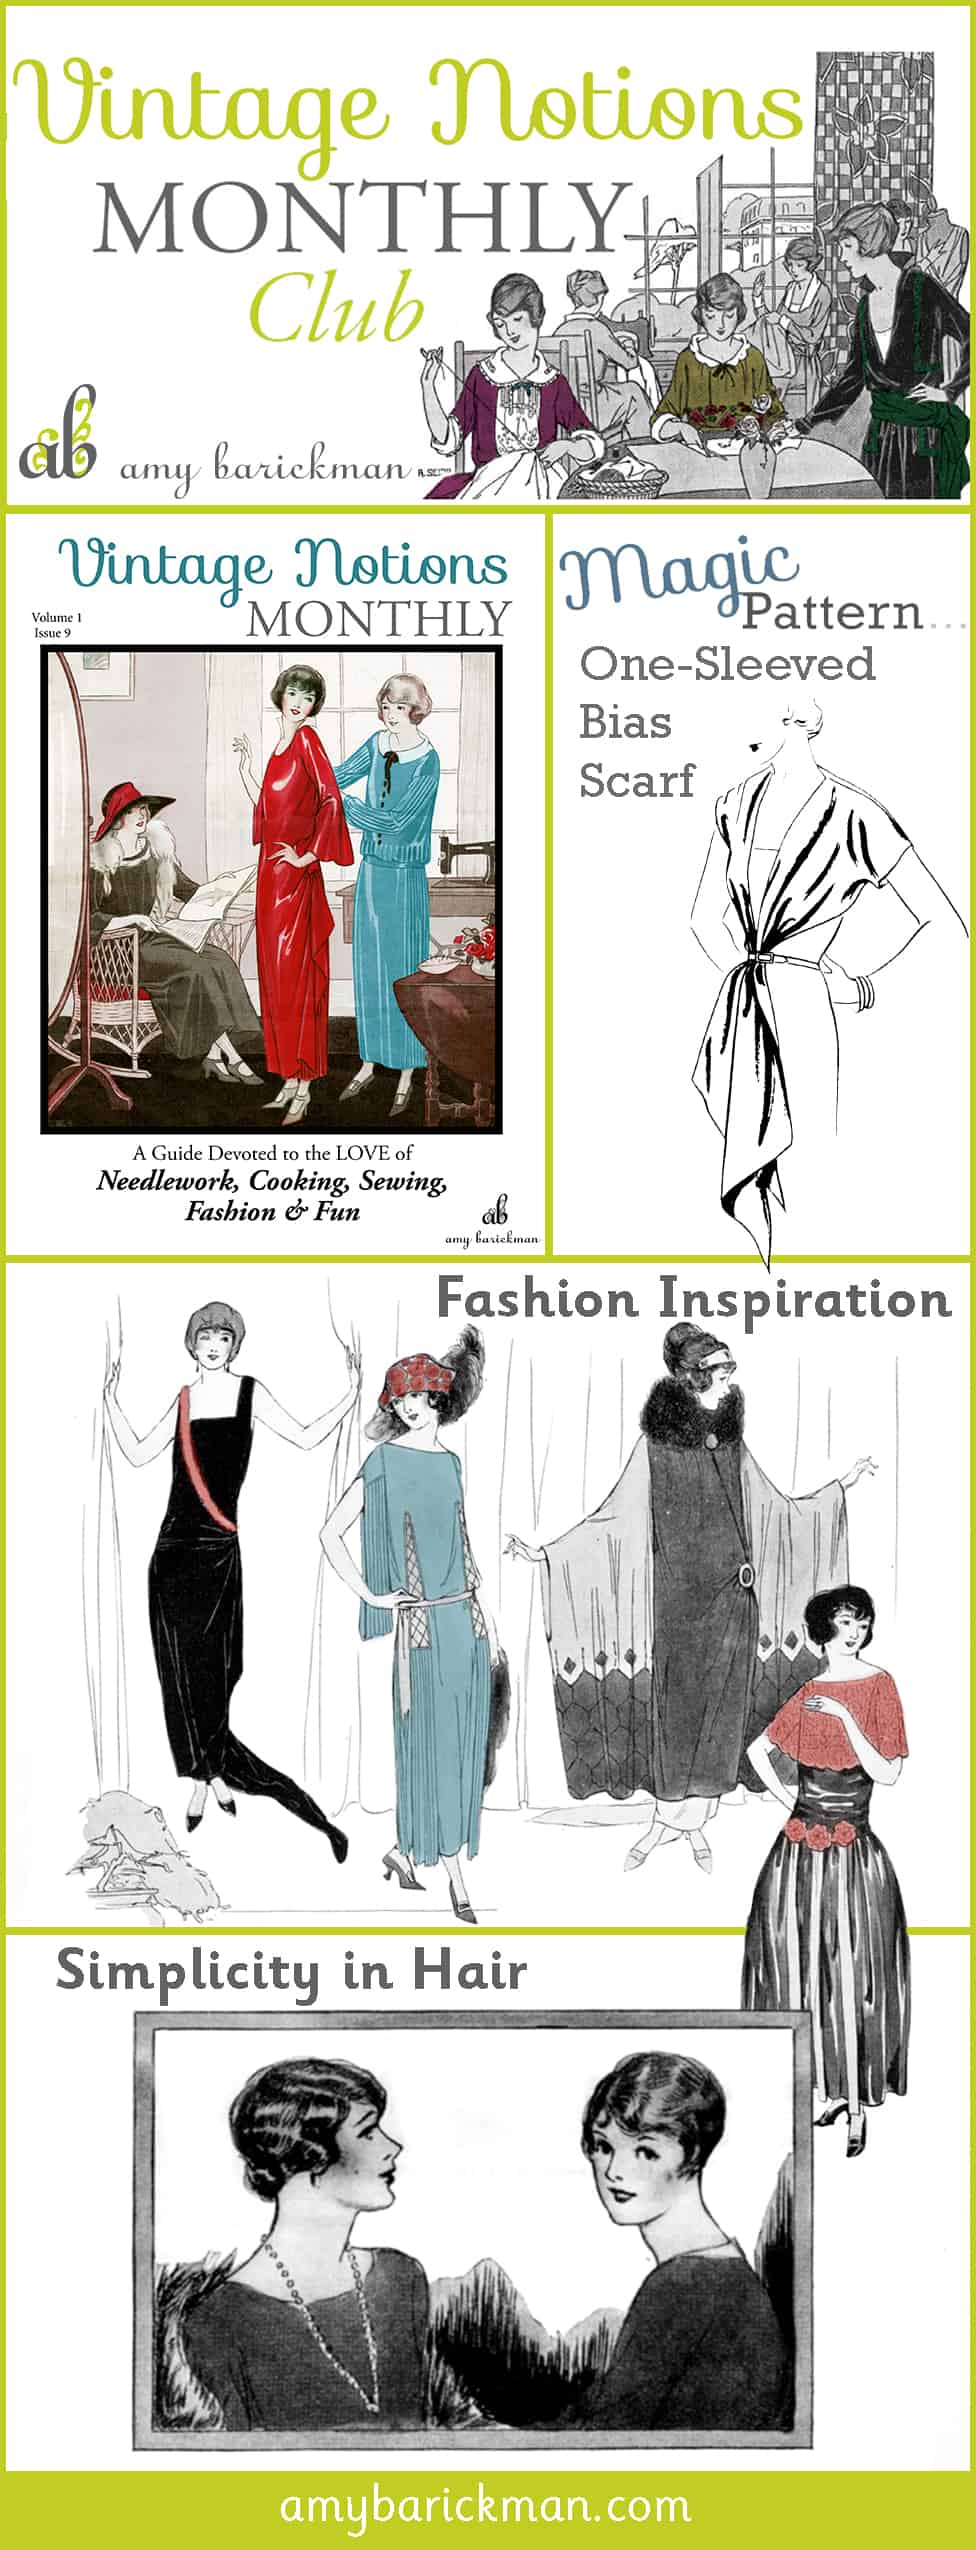 Author Amy Barickman's magazine is a beautiful Vintage Made Modern peek into the past!